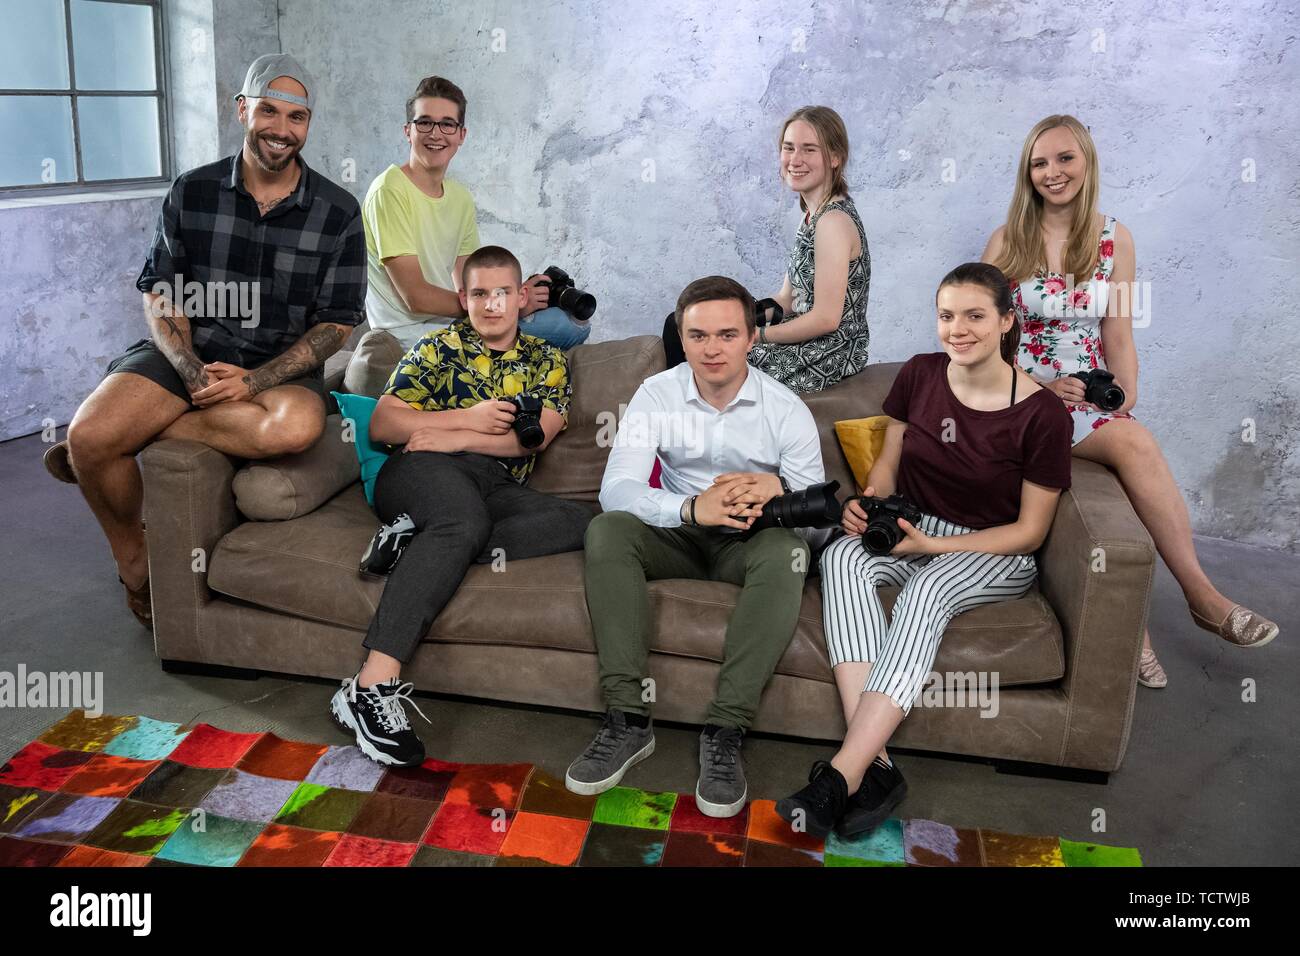 07 June 2019, Bavaria, Munich: Benjamin Jaworskyj (above l-r), photographer, author and web video producer, Levin Sackhoff, sofa Mila Kapaun, Anna-Lena Kockmann, Benjamin Tielmann (below l-r), Anton Engelhardt and Leoni Kipka, participants of the ZDF programme 'Die Kamerahelden - Deine Schule, Deine Fotos', sit on the set in the Werk3Studio. The new Factual series is created for ZDF in Munich. In eight episodes, pupils between the ages of 15 and 16 from several schools in Germany will compete against each other in a photo competition to present the diversity of the school environment in German Stock Photo